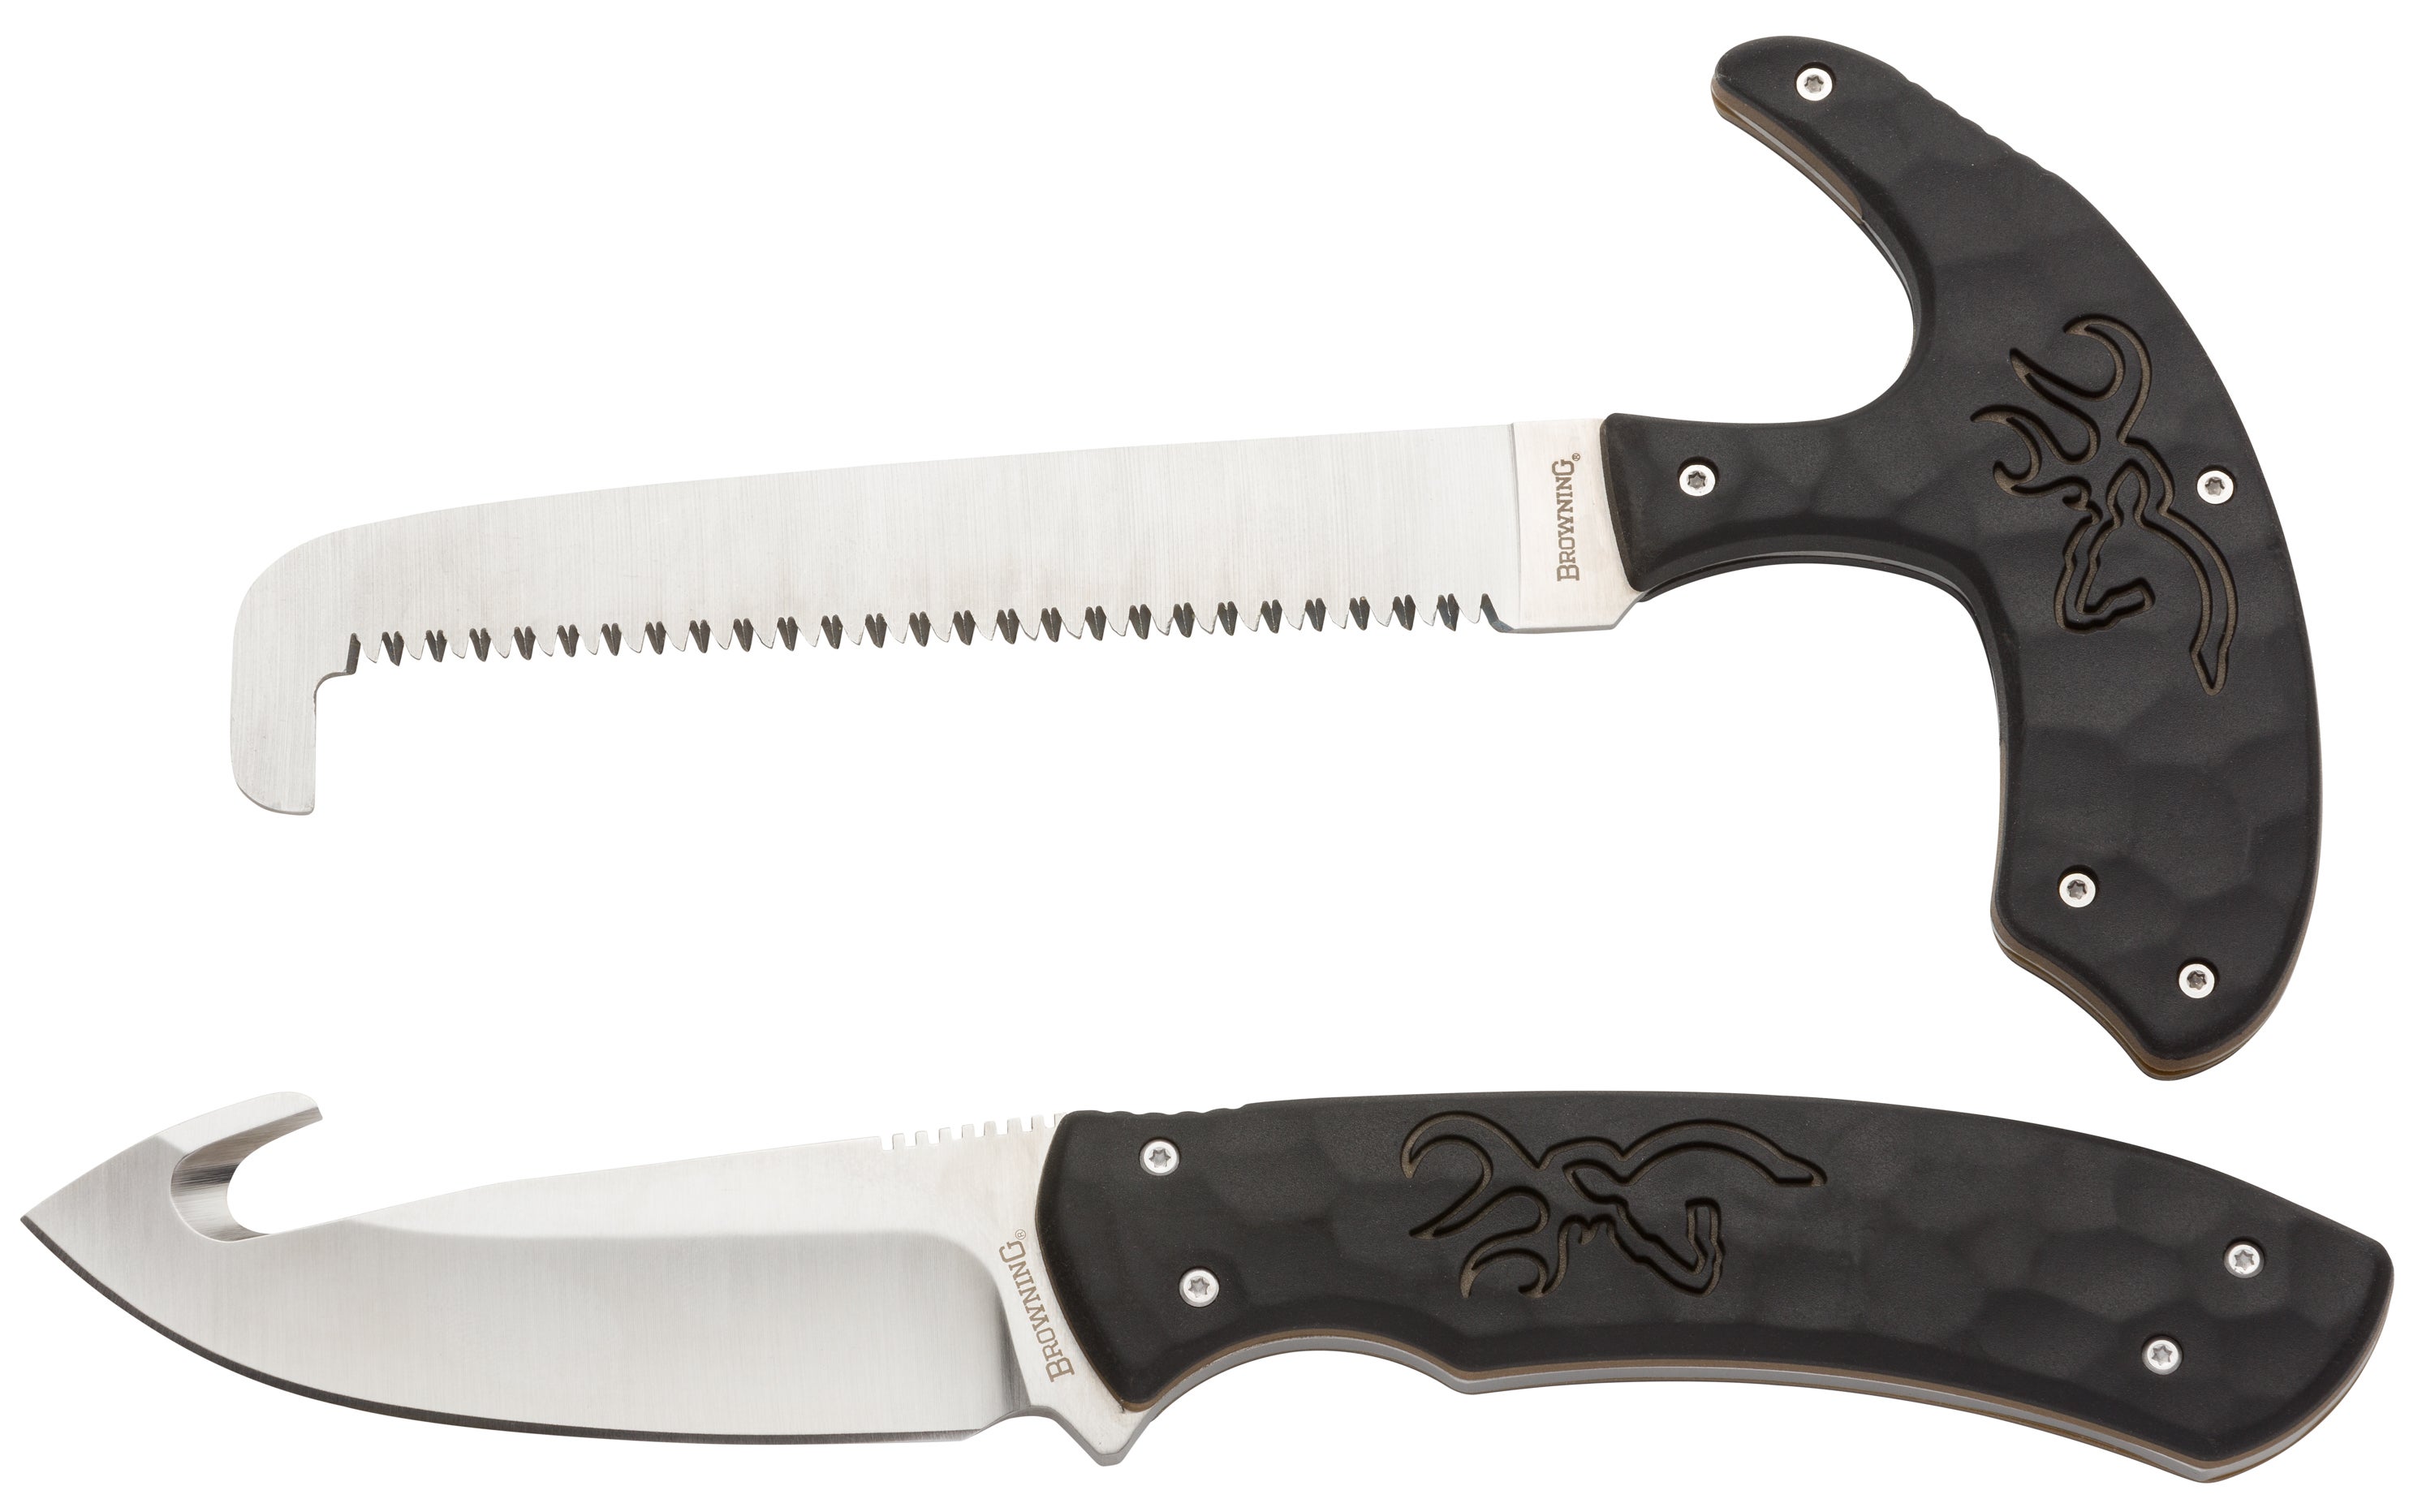 https://www.browning.com/content/dam/browning/product/knives/2021/2021-hunting/primal-combo-2-piece/Browning-Primal-Combo-2-Piece-3220420-01.jpg